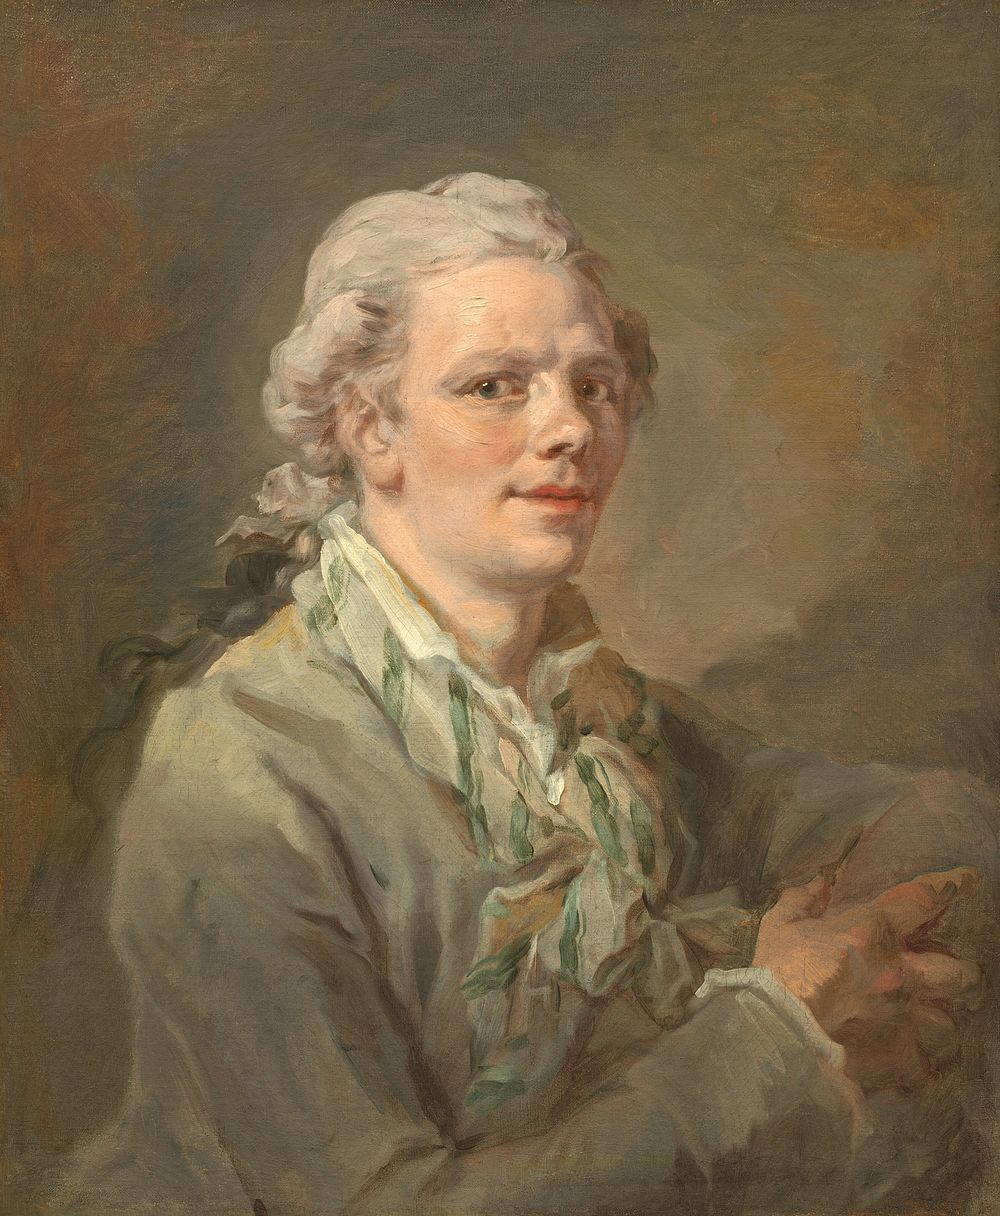 Portrait of a Young Man, possibly (ca. 1770) from the French 18th Century.